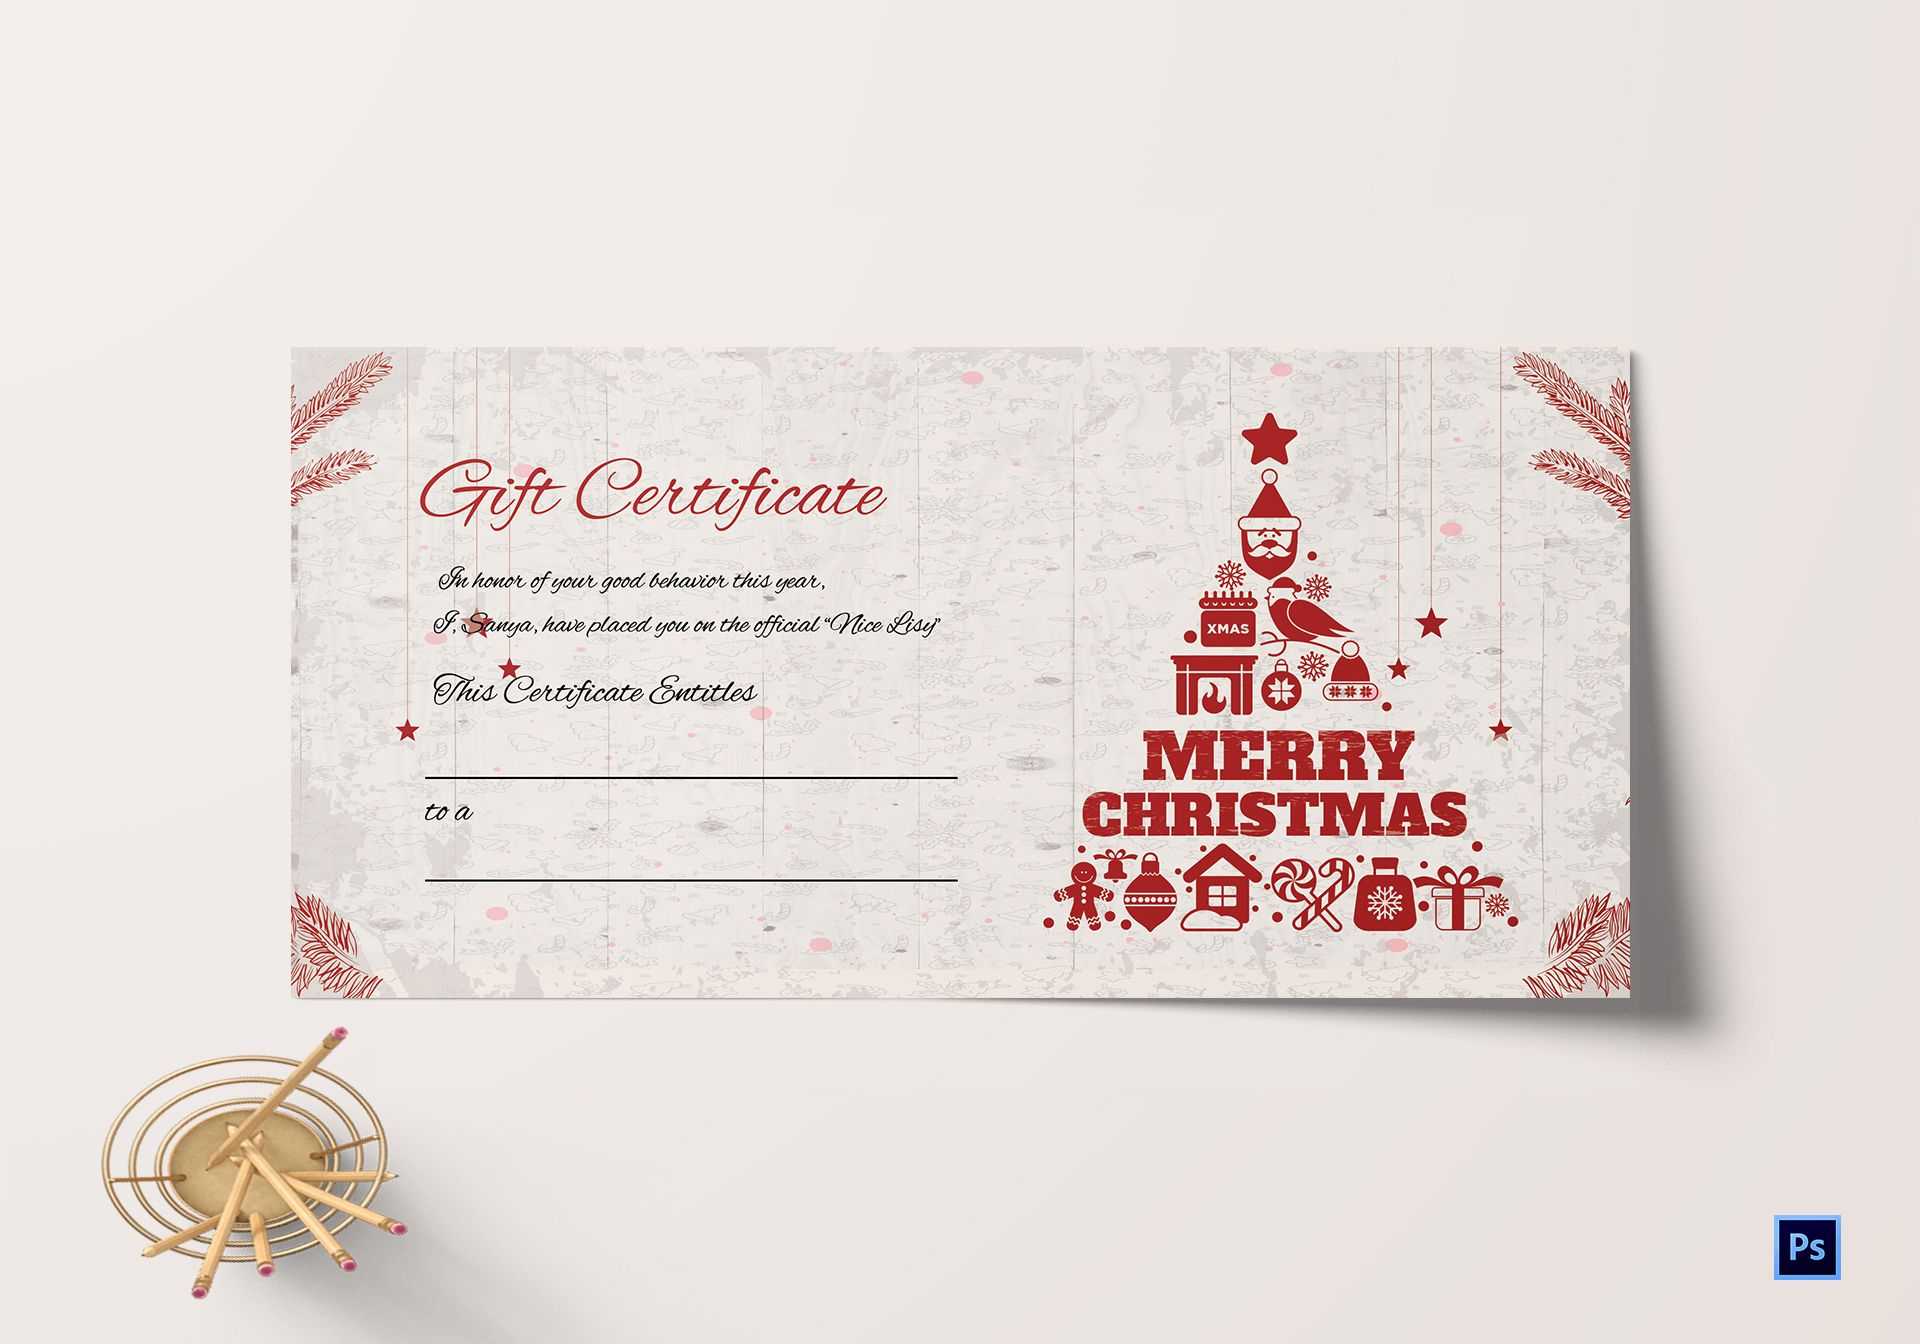 Merry Christmas Gift Certificate For Christmas Gift Certificate Template Free Download